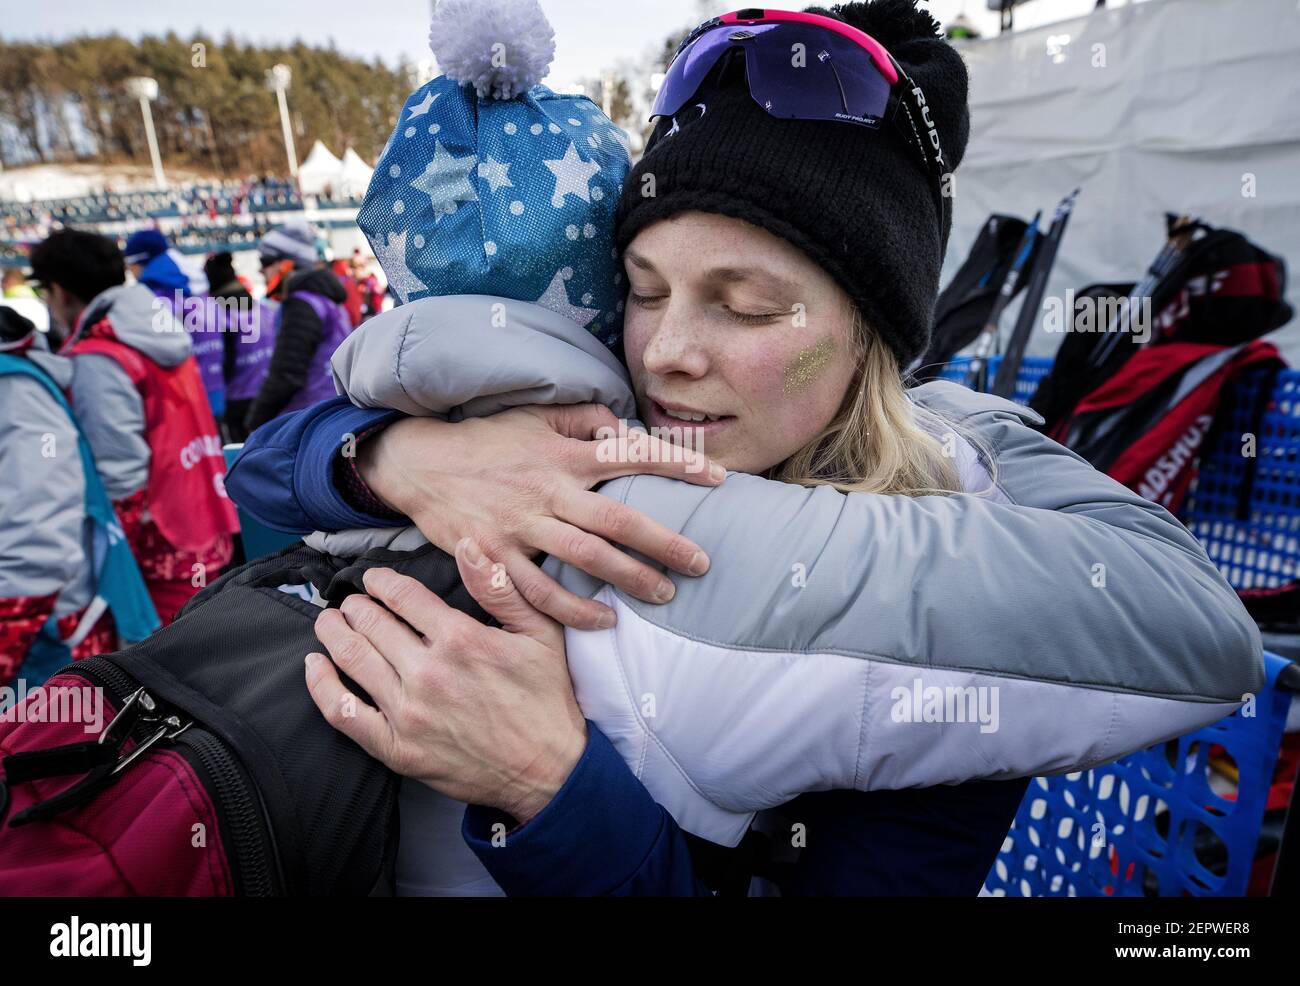 Jessie Diggins of Afton, Minn., right, gets a hug from her mother after finishing fifth in the women's 10km Cross Country freestyle final at Alpensia Cross-Country Centre on Thursday, February 15, 2018, at the Winter Olympics in Pyeongchang, South Korea. (Photo by Carlos Gonzalez/Minneapolis Star Tribune/TNS/Sipa USA) Stock Photo